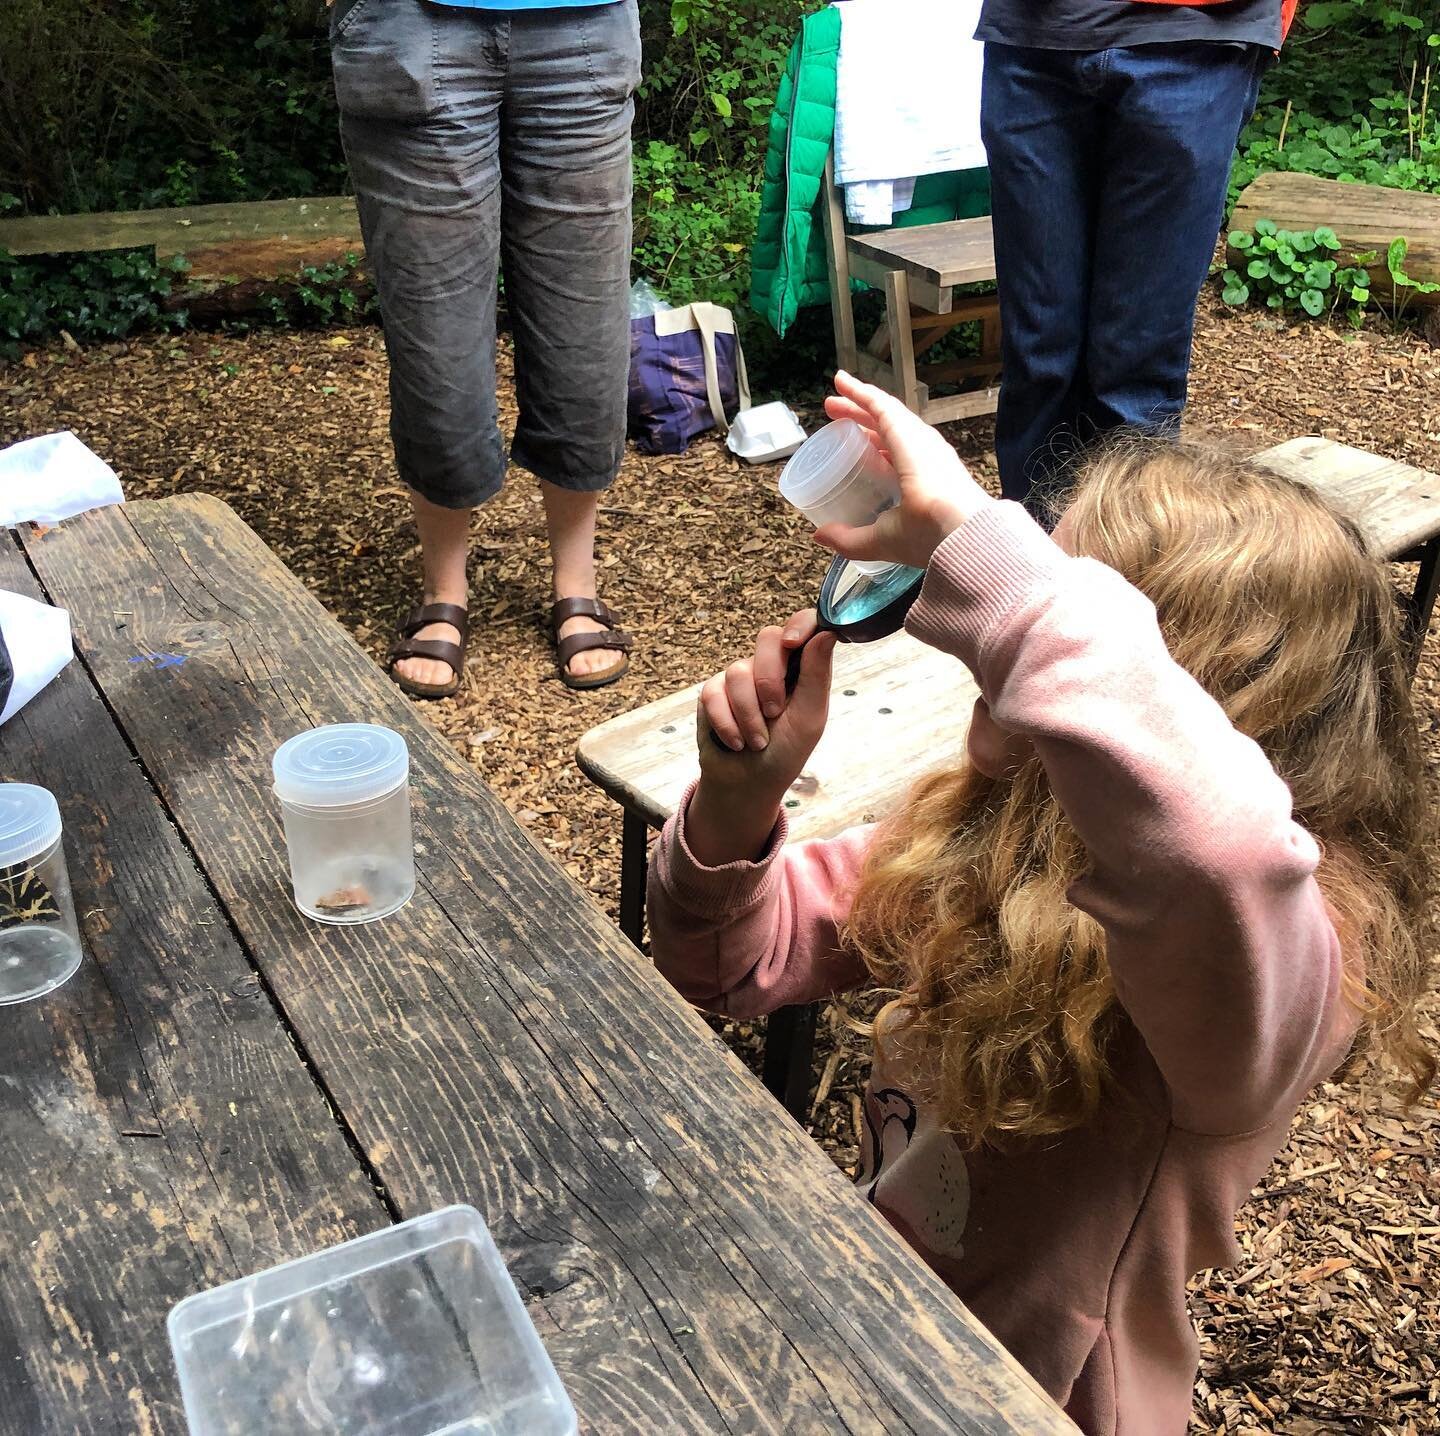 Budding #citizenscientist @phytologyuk this morning, for the first of what I hope will be many London Moth Project ID sessions, looking at the biodiversity of our urban refuges.
Moths #moth #lepidoptera #moths  #moth #mothsmatter  #mothwatching #moth